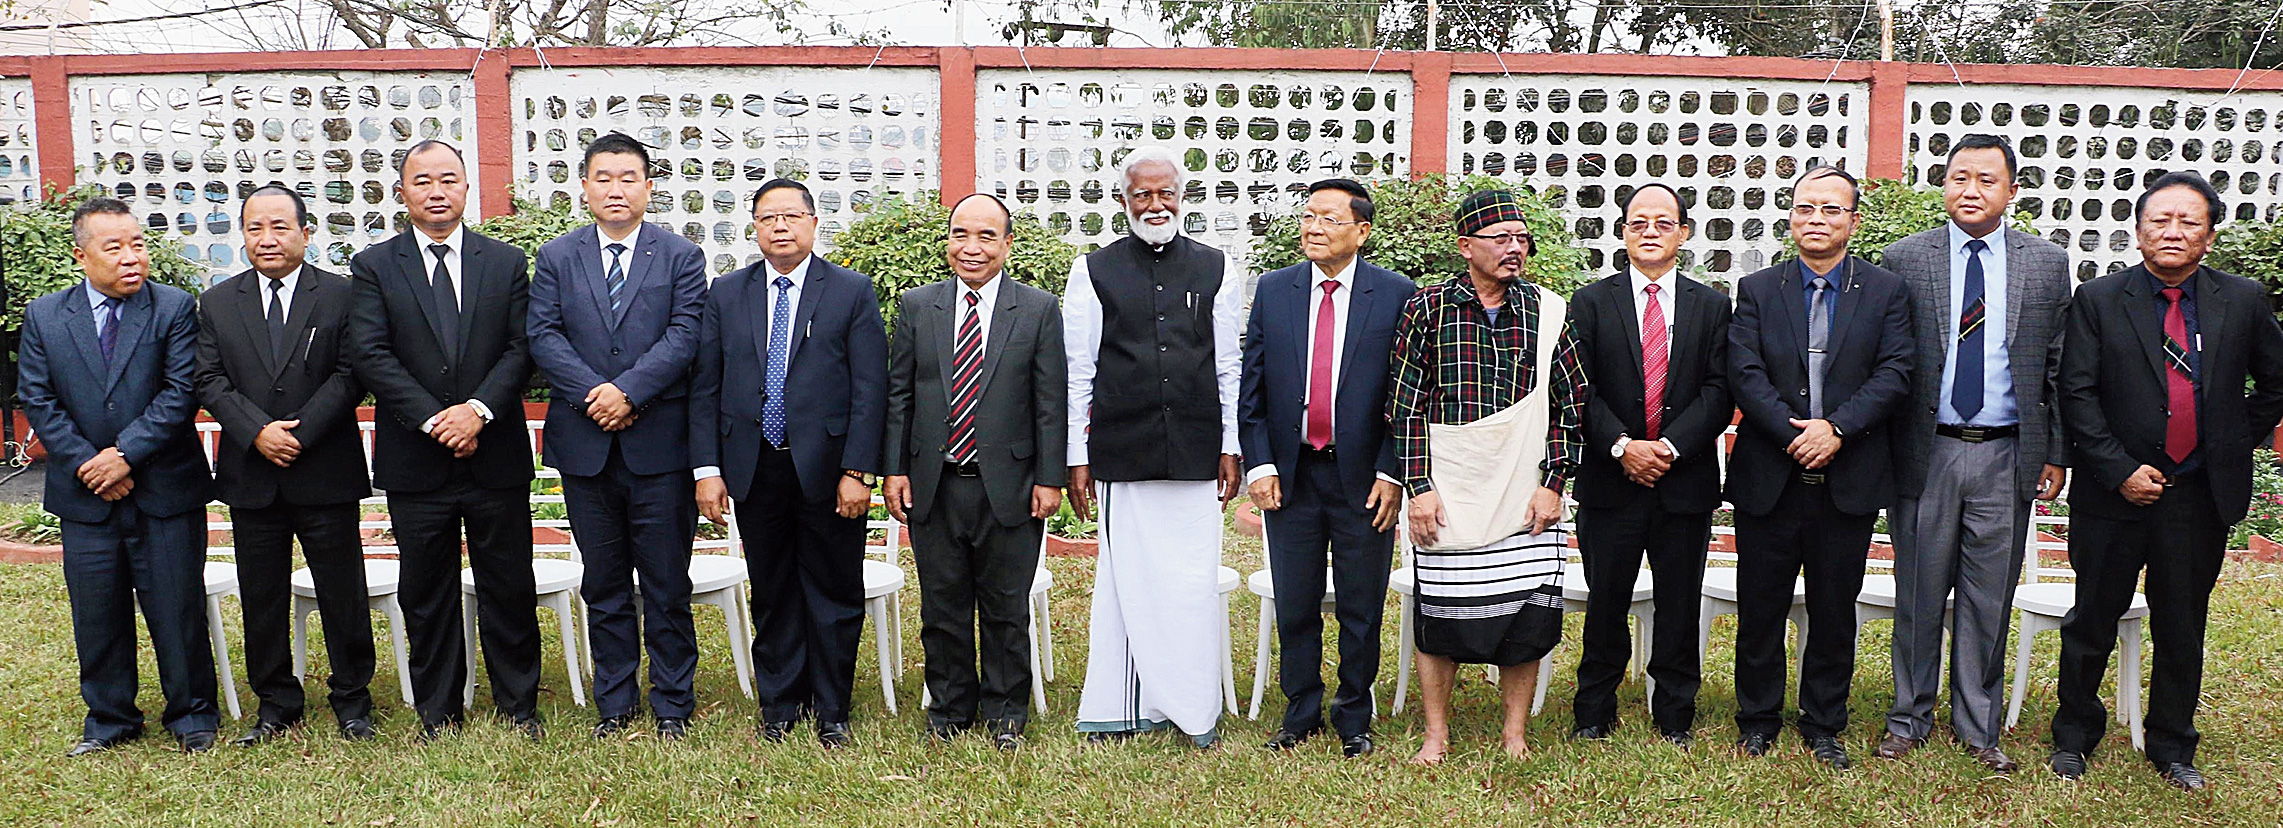 The council of ministers with Mizoram governor K. Rajasekharan and chief minister Zoramthanga after the ceremony in Aizawl on Saturday.